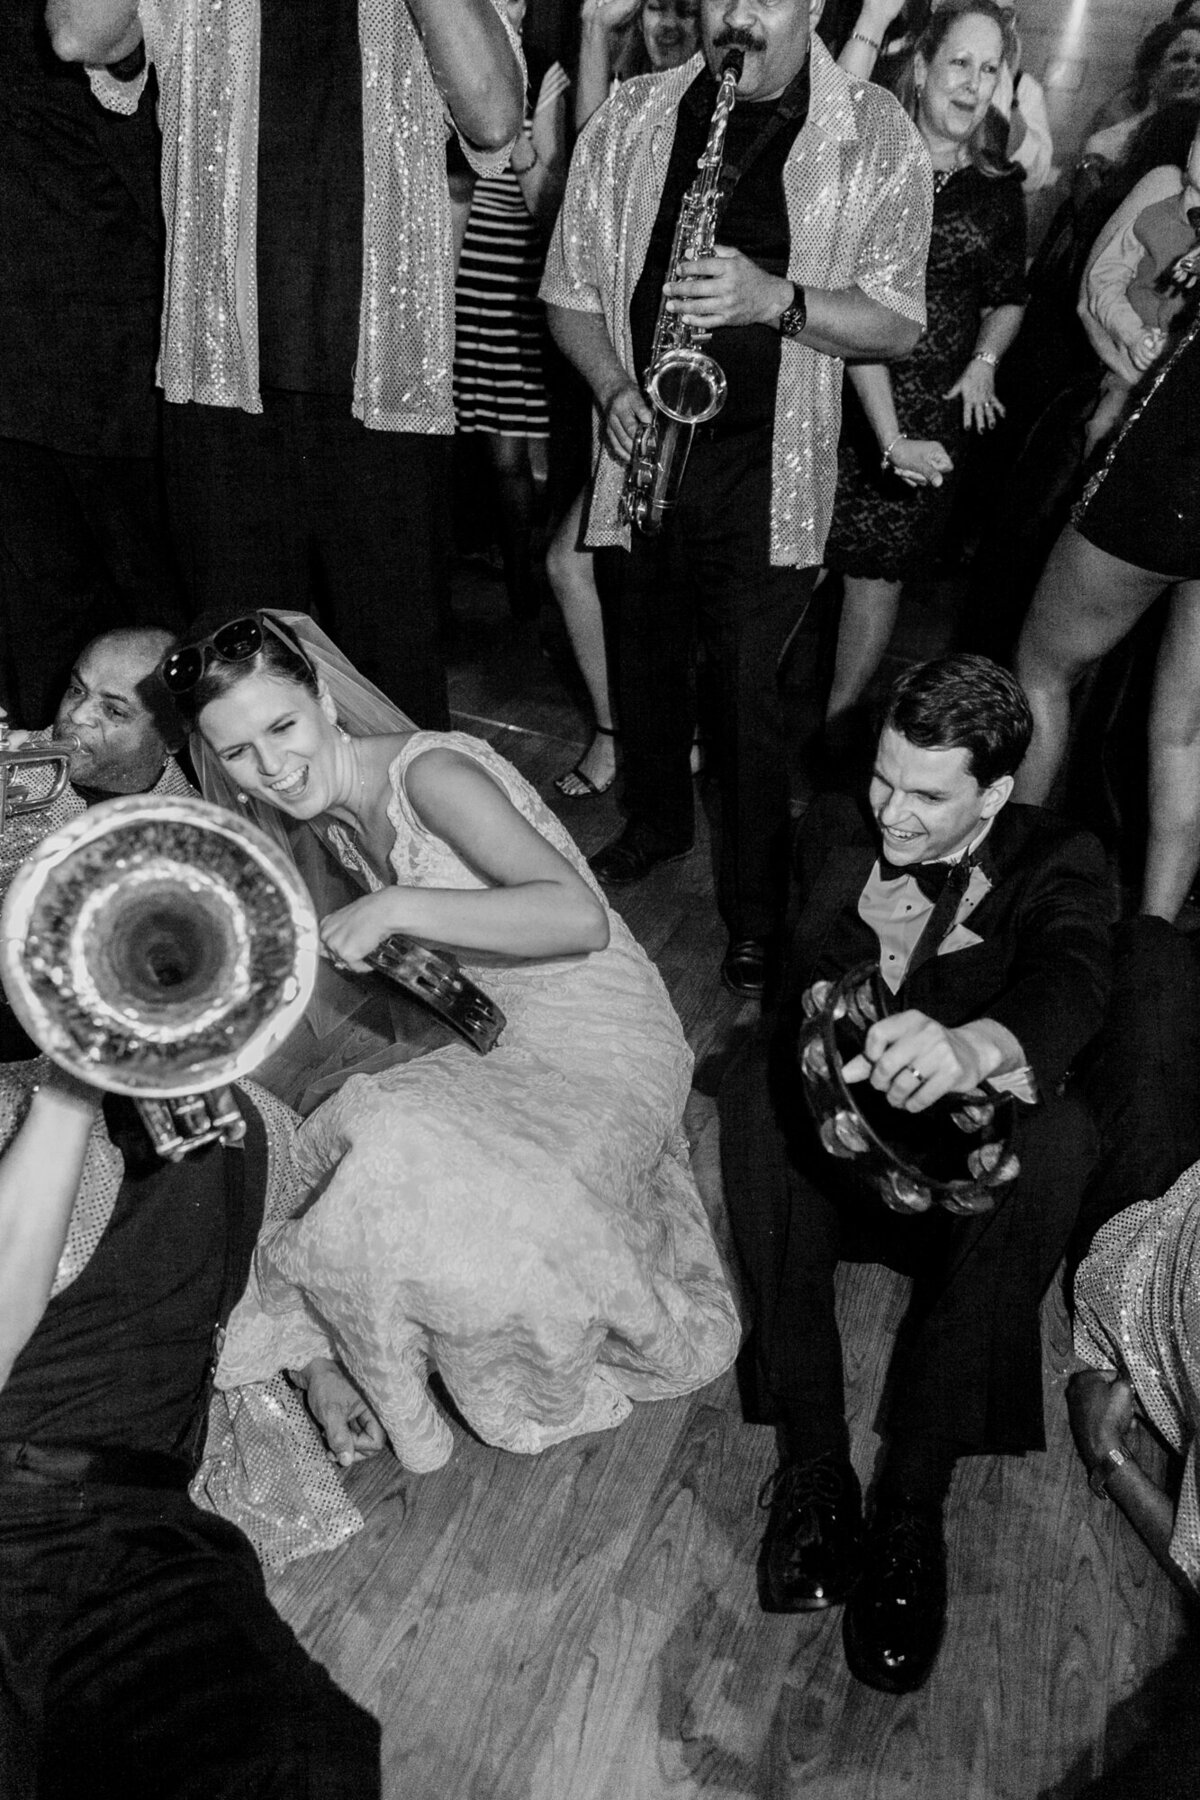 A bride and groom join the band on the dance floor for this candid black and white wedding photograph